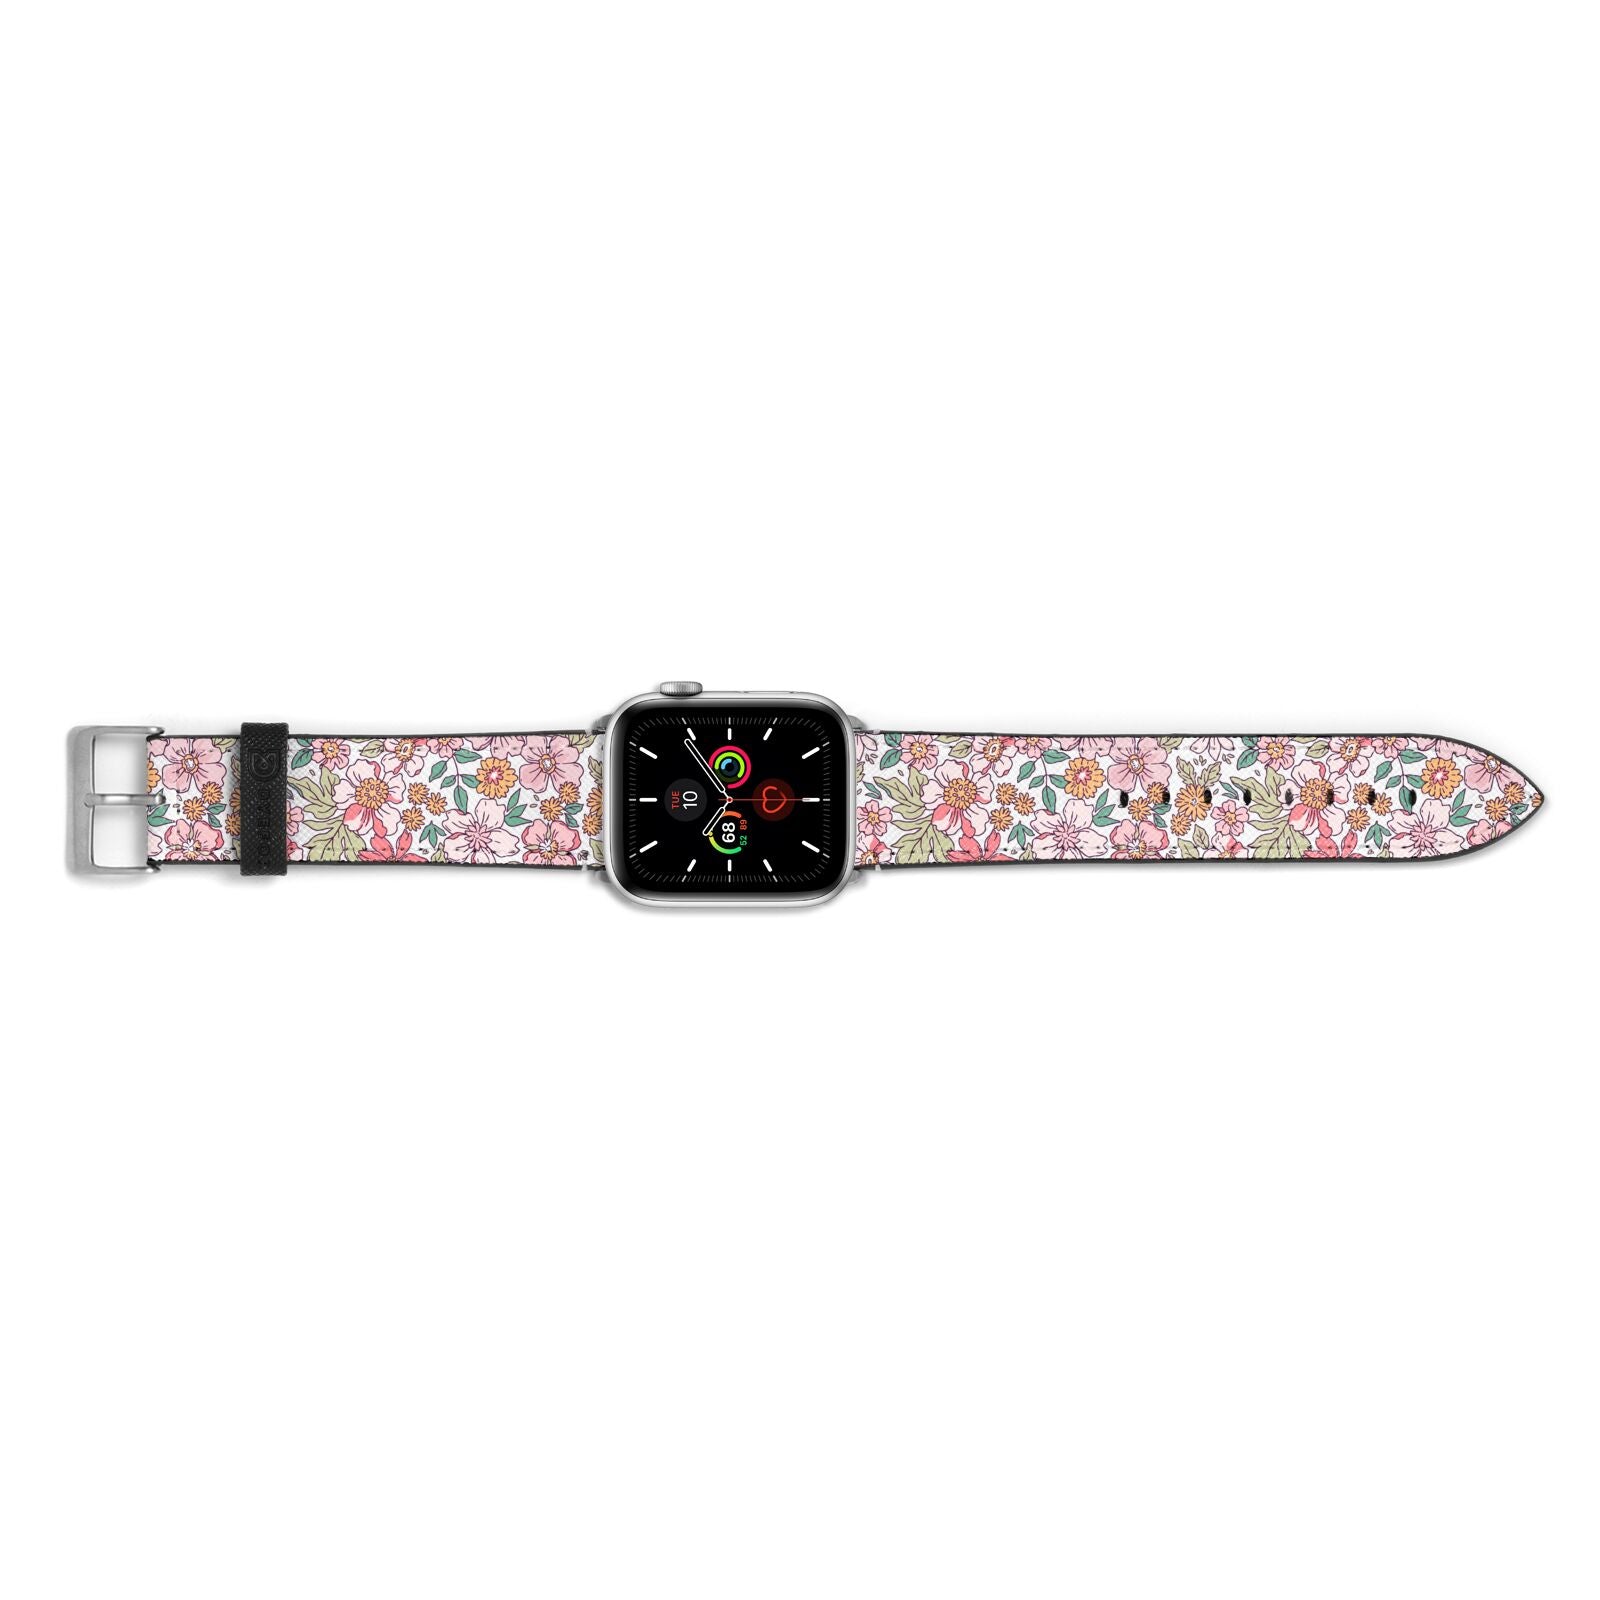 Small Floral Pattern Apple Watch Strap Landscape Image Silver Hardware